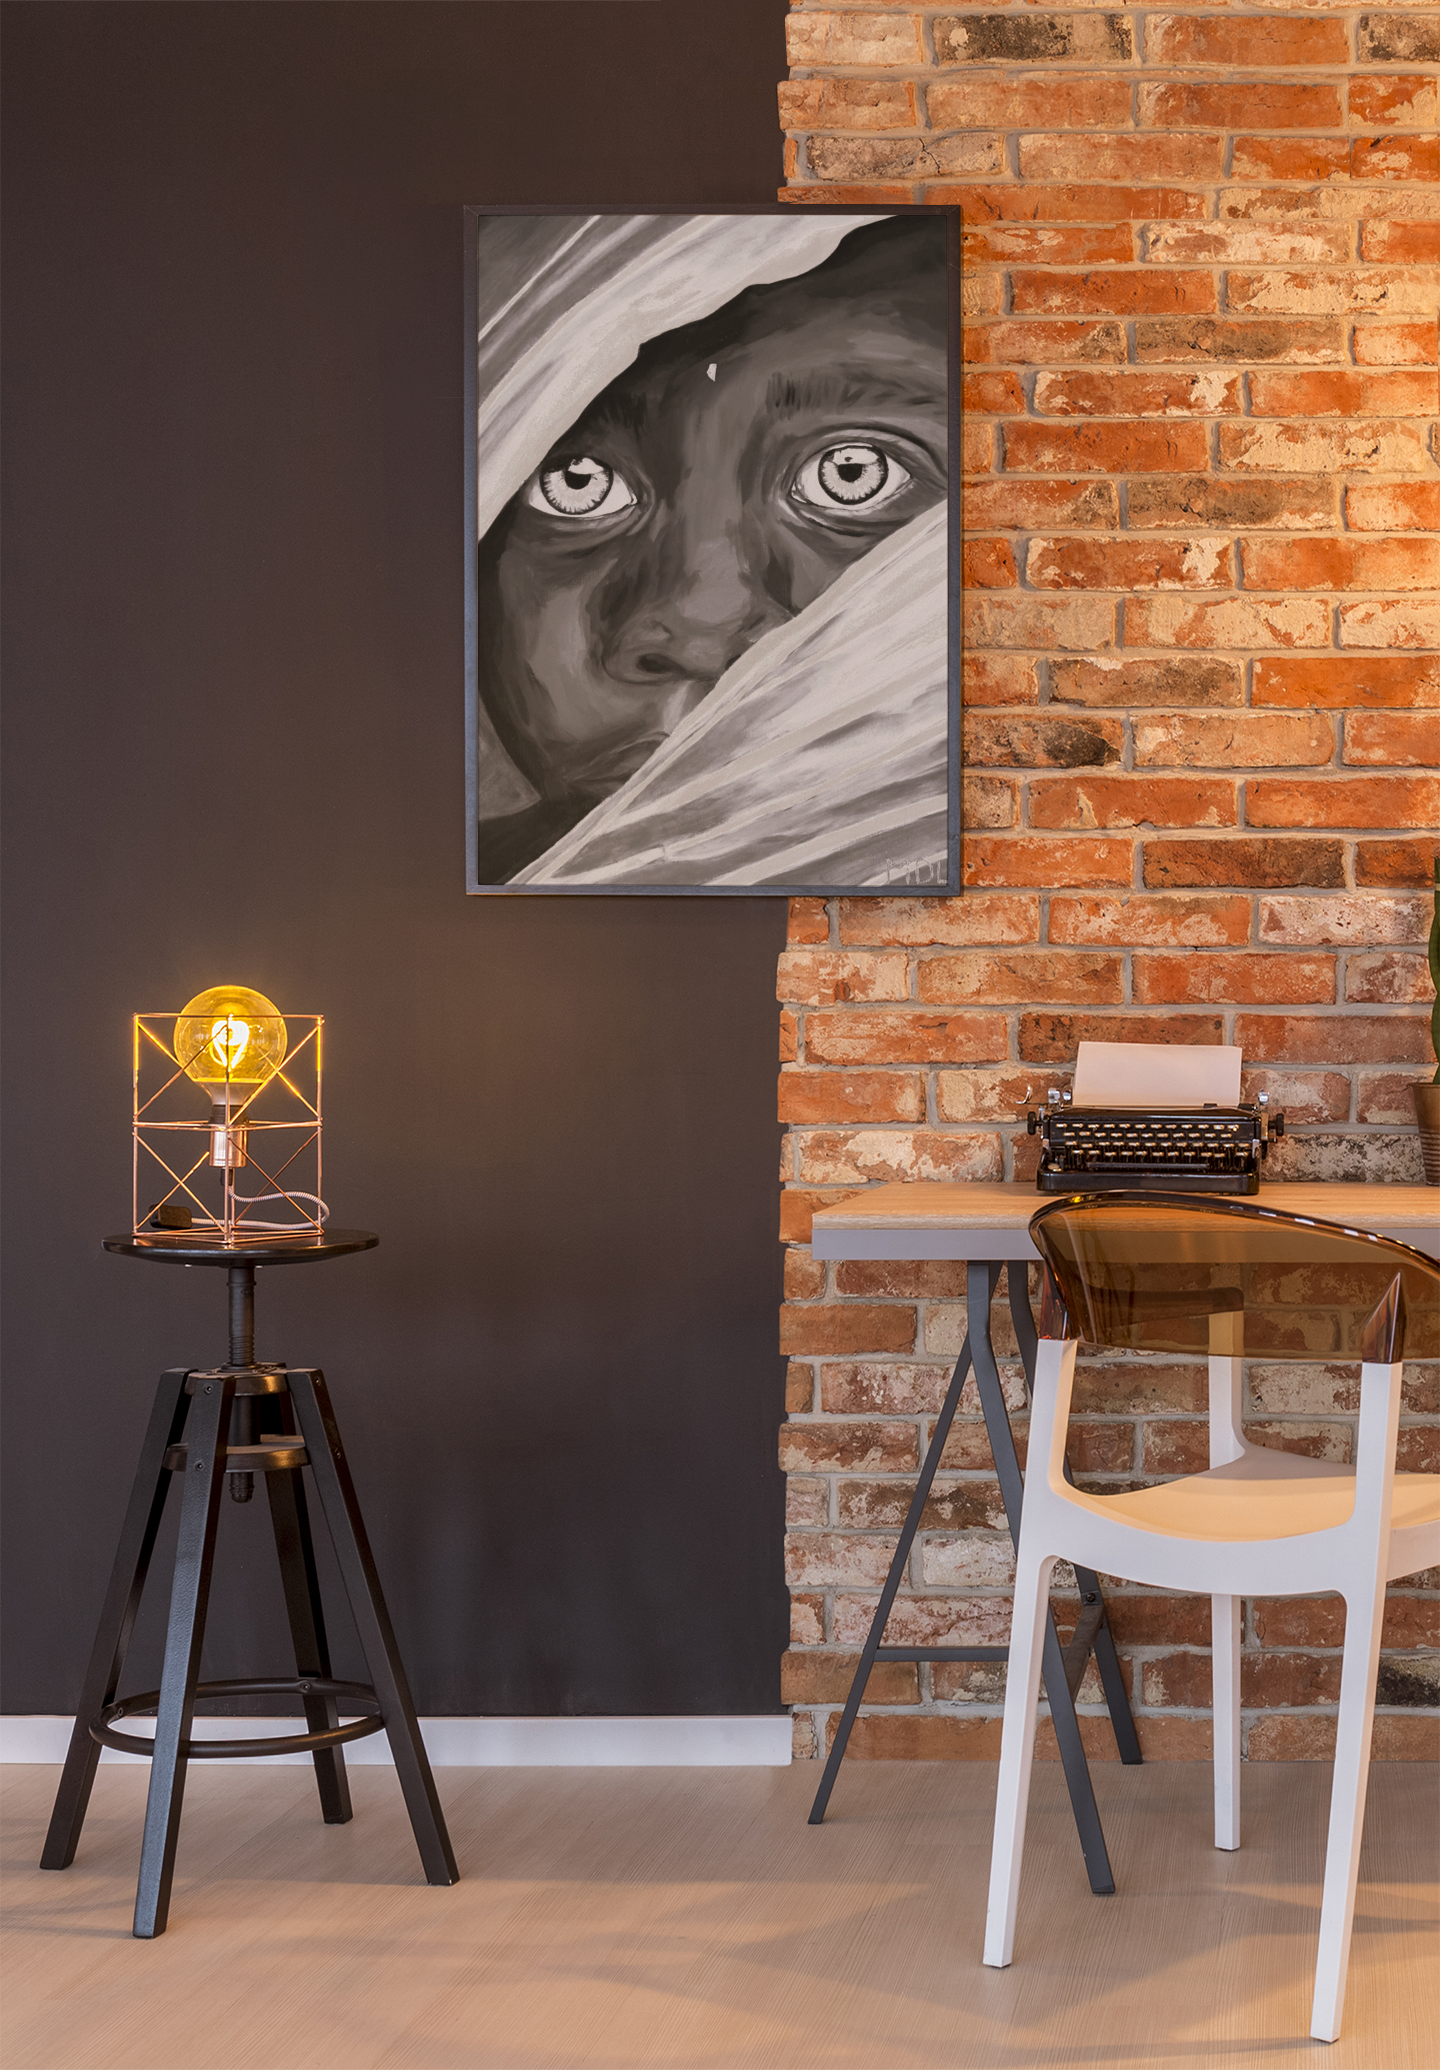 A black and white giclee art print of an African Boy hanging up on a brick wall over a desk